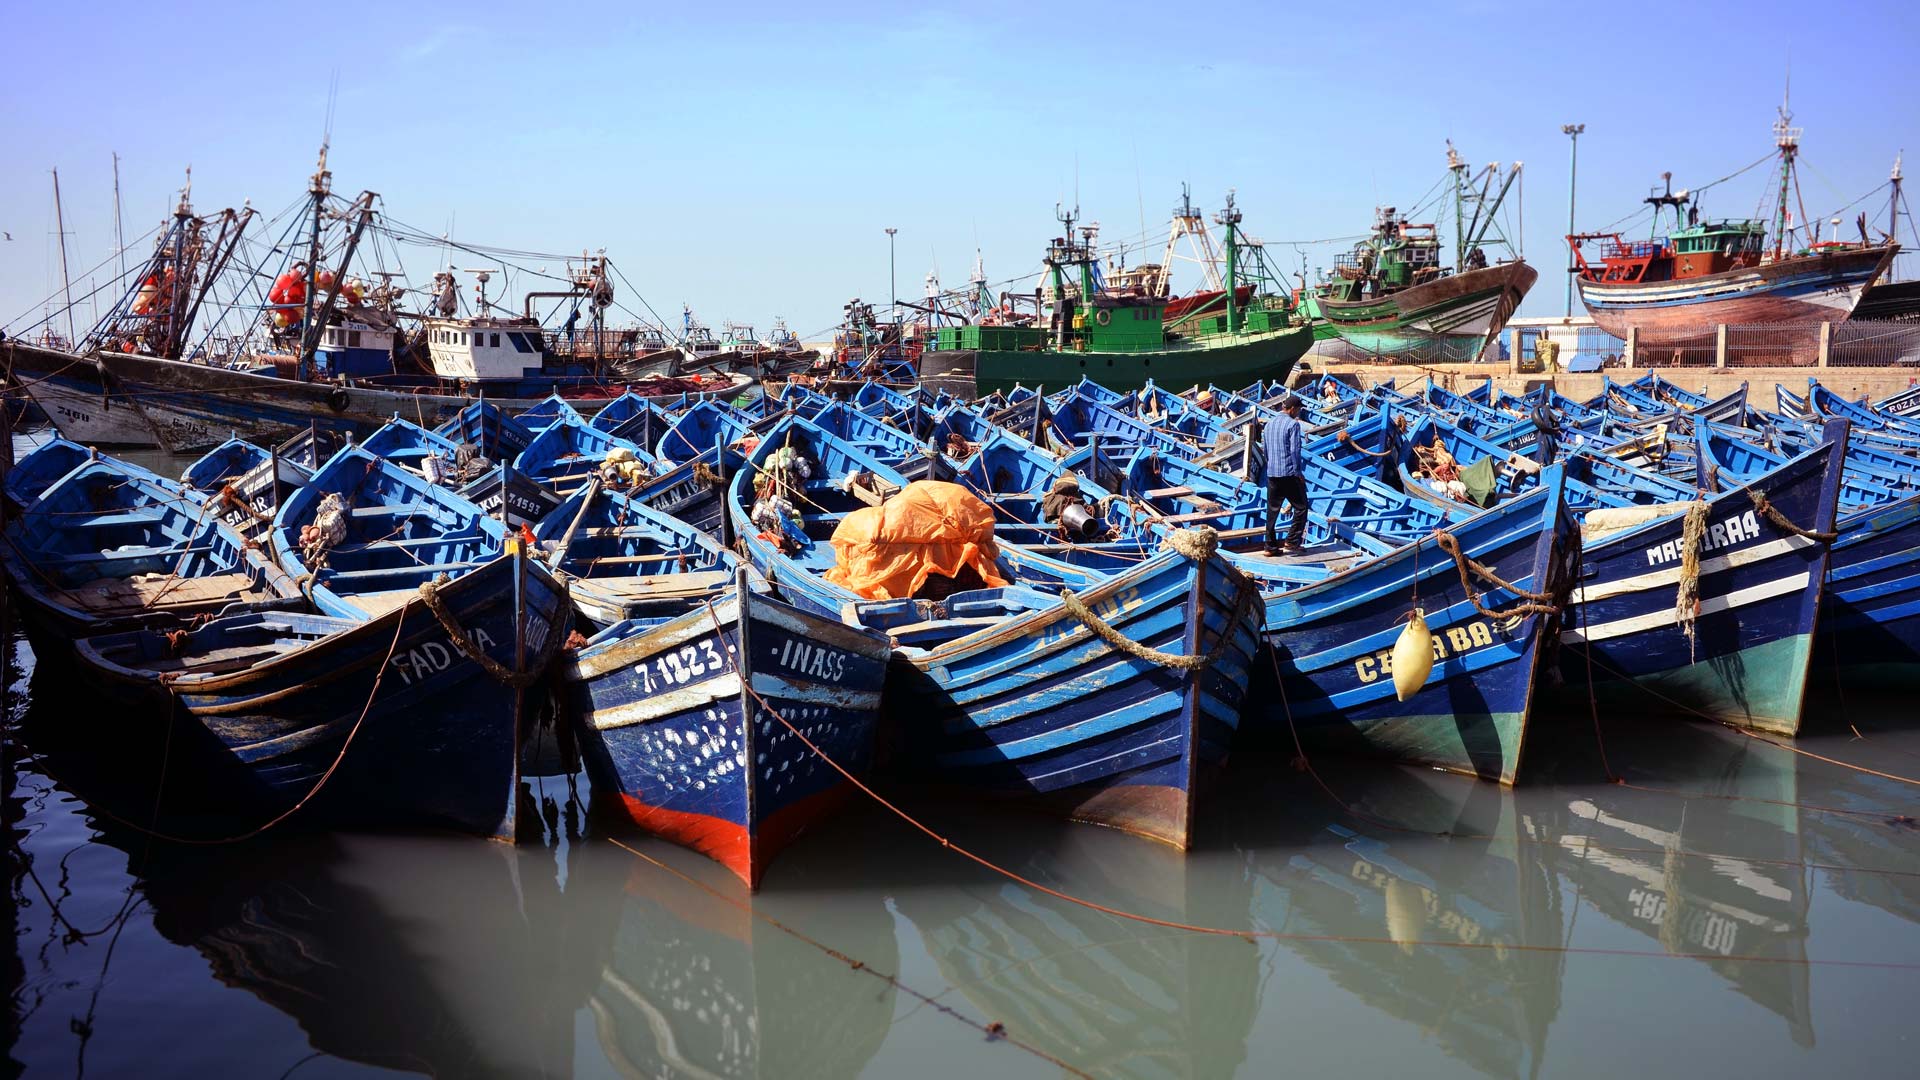 Boats in the port of Essaouira, Morocco.